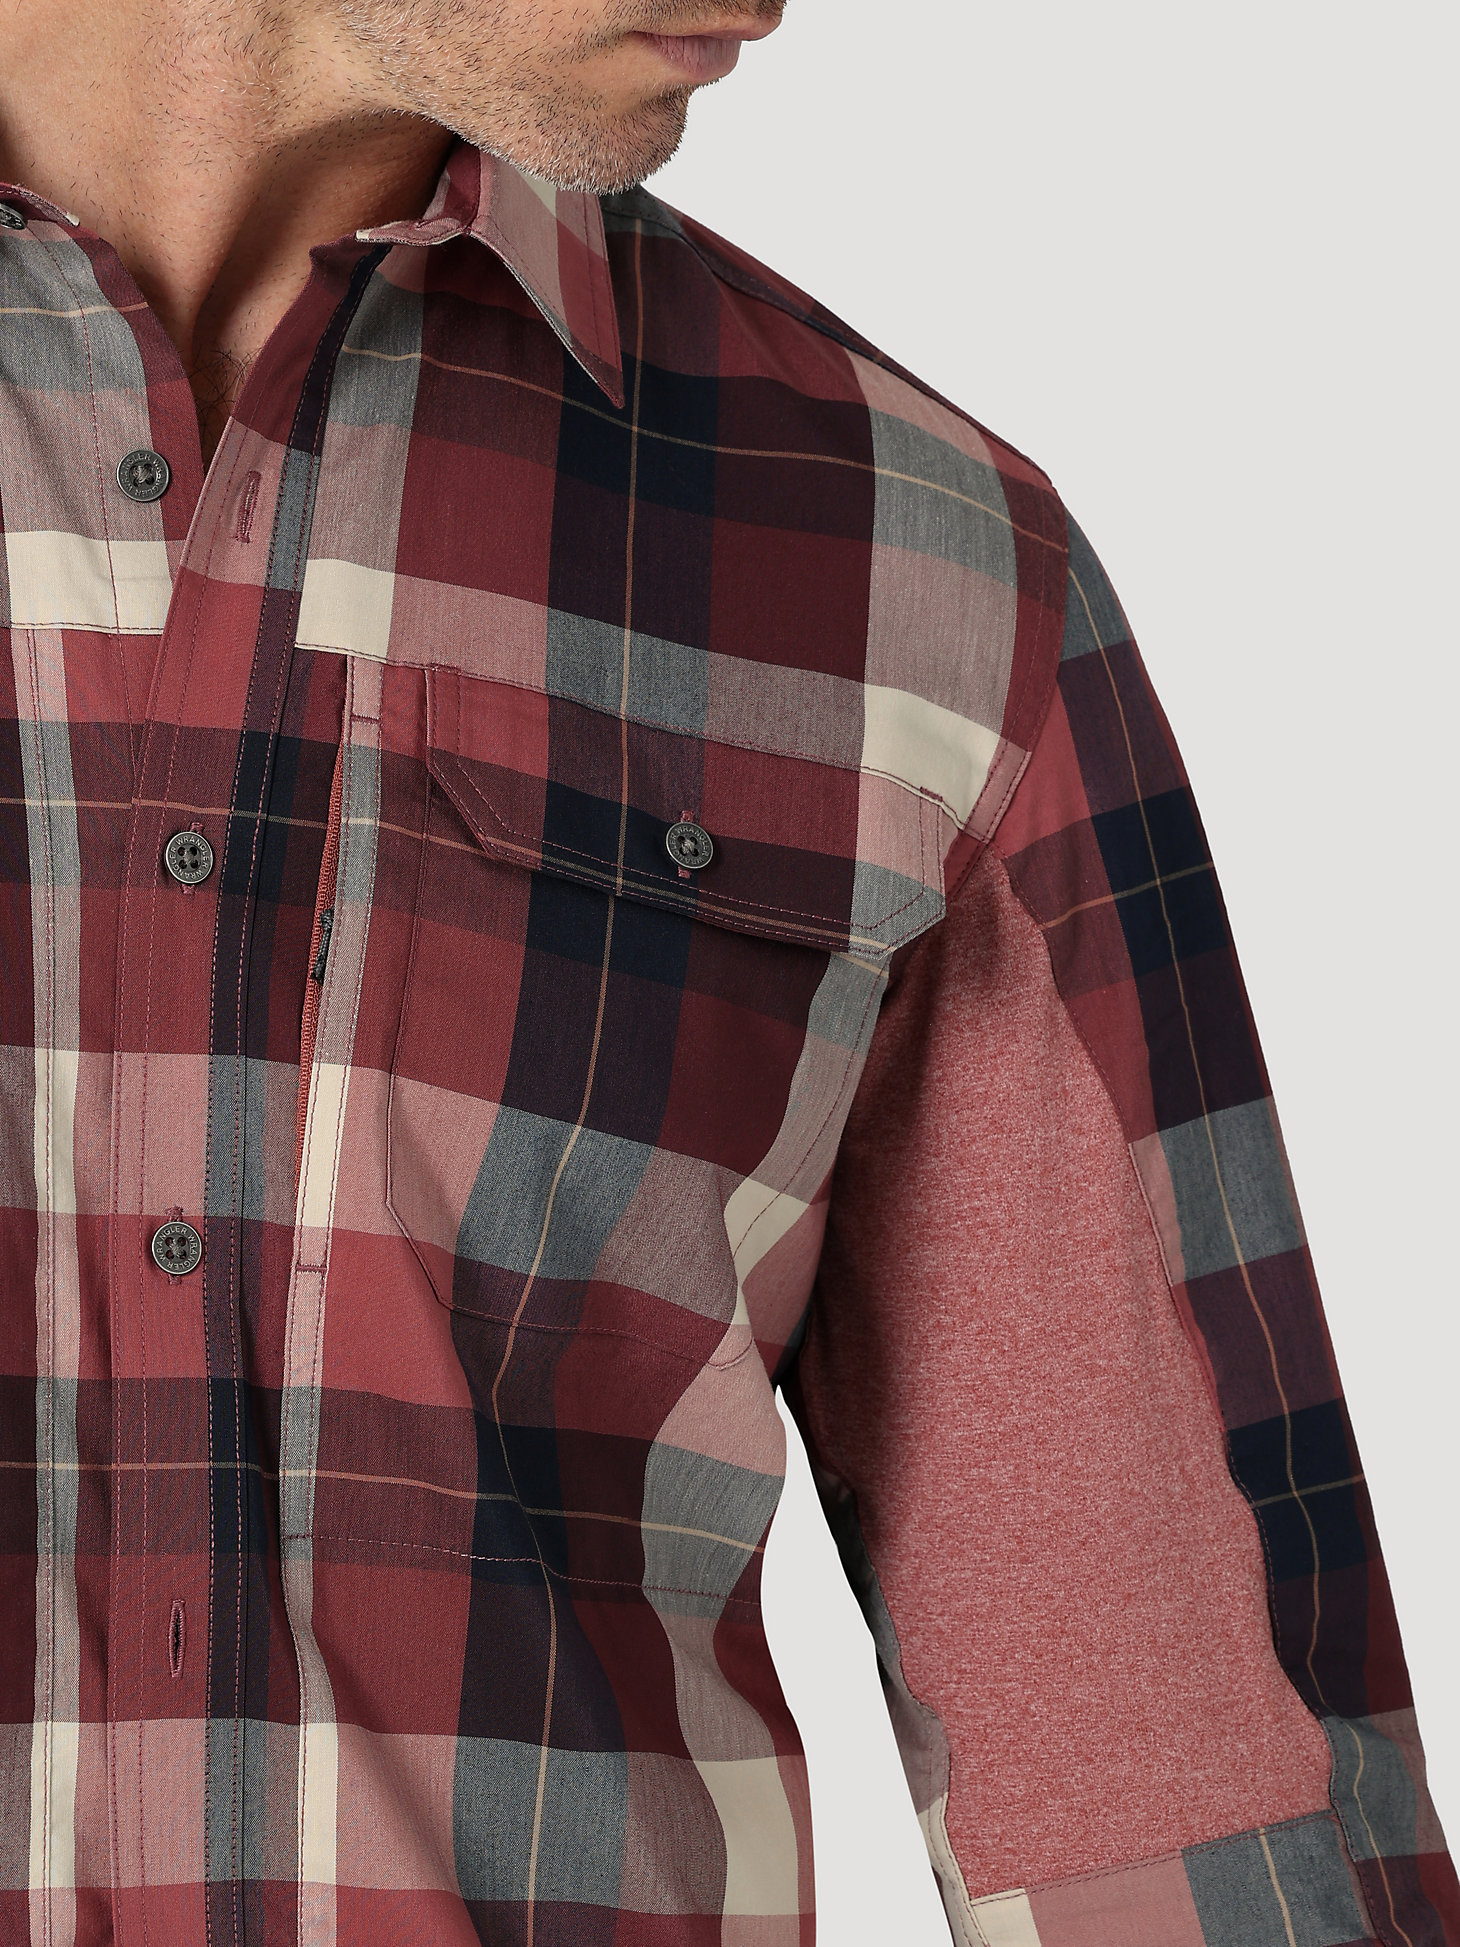 ATG By Wrangler™ Plaid Mixed Material Shirt in Beagle Apple Butter alternative view 6